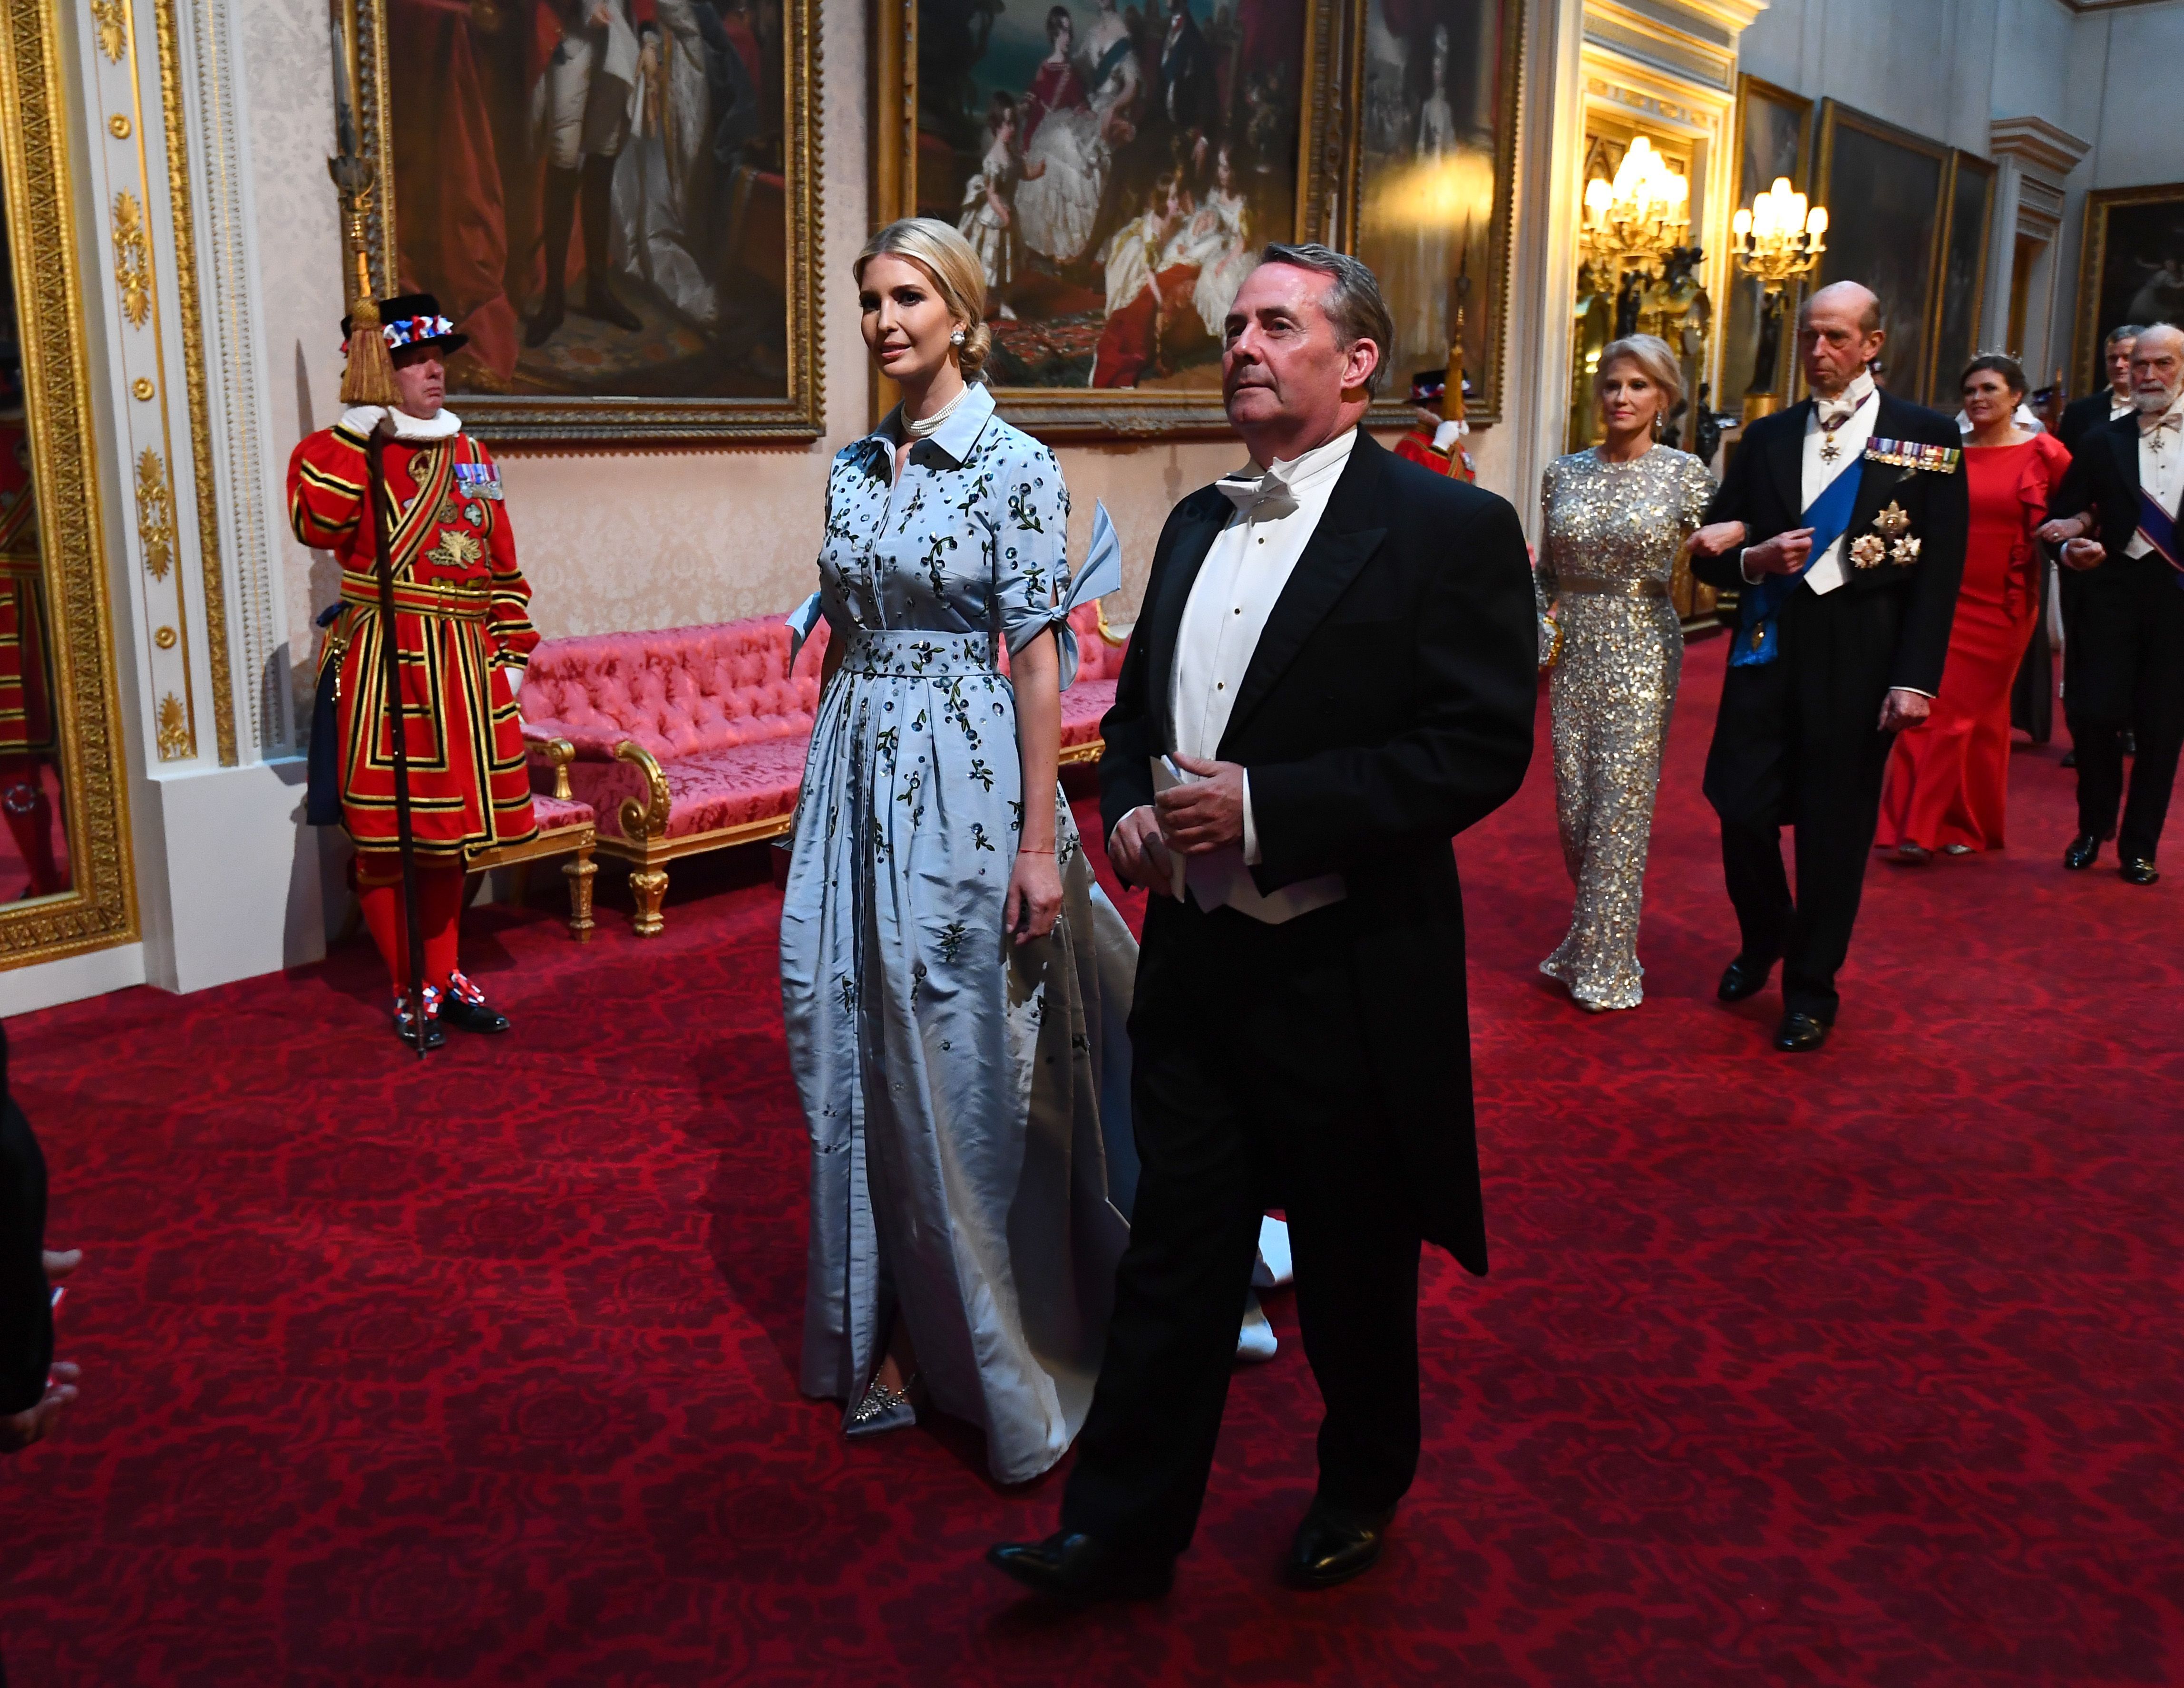 Ivanka Trump and Britain's International Trade Secretary Liam Fox arrive through the East Gallery during a State Banquet in the ballroom at Buckingham Palace in central London on June 3.